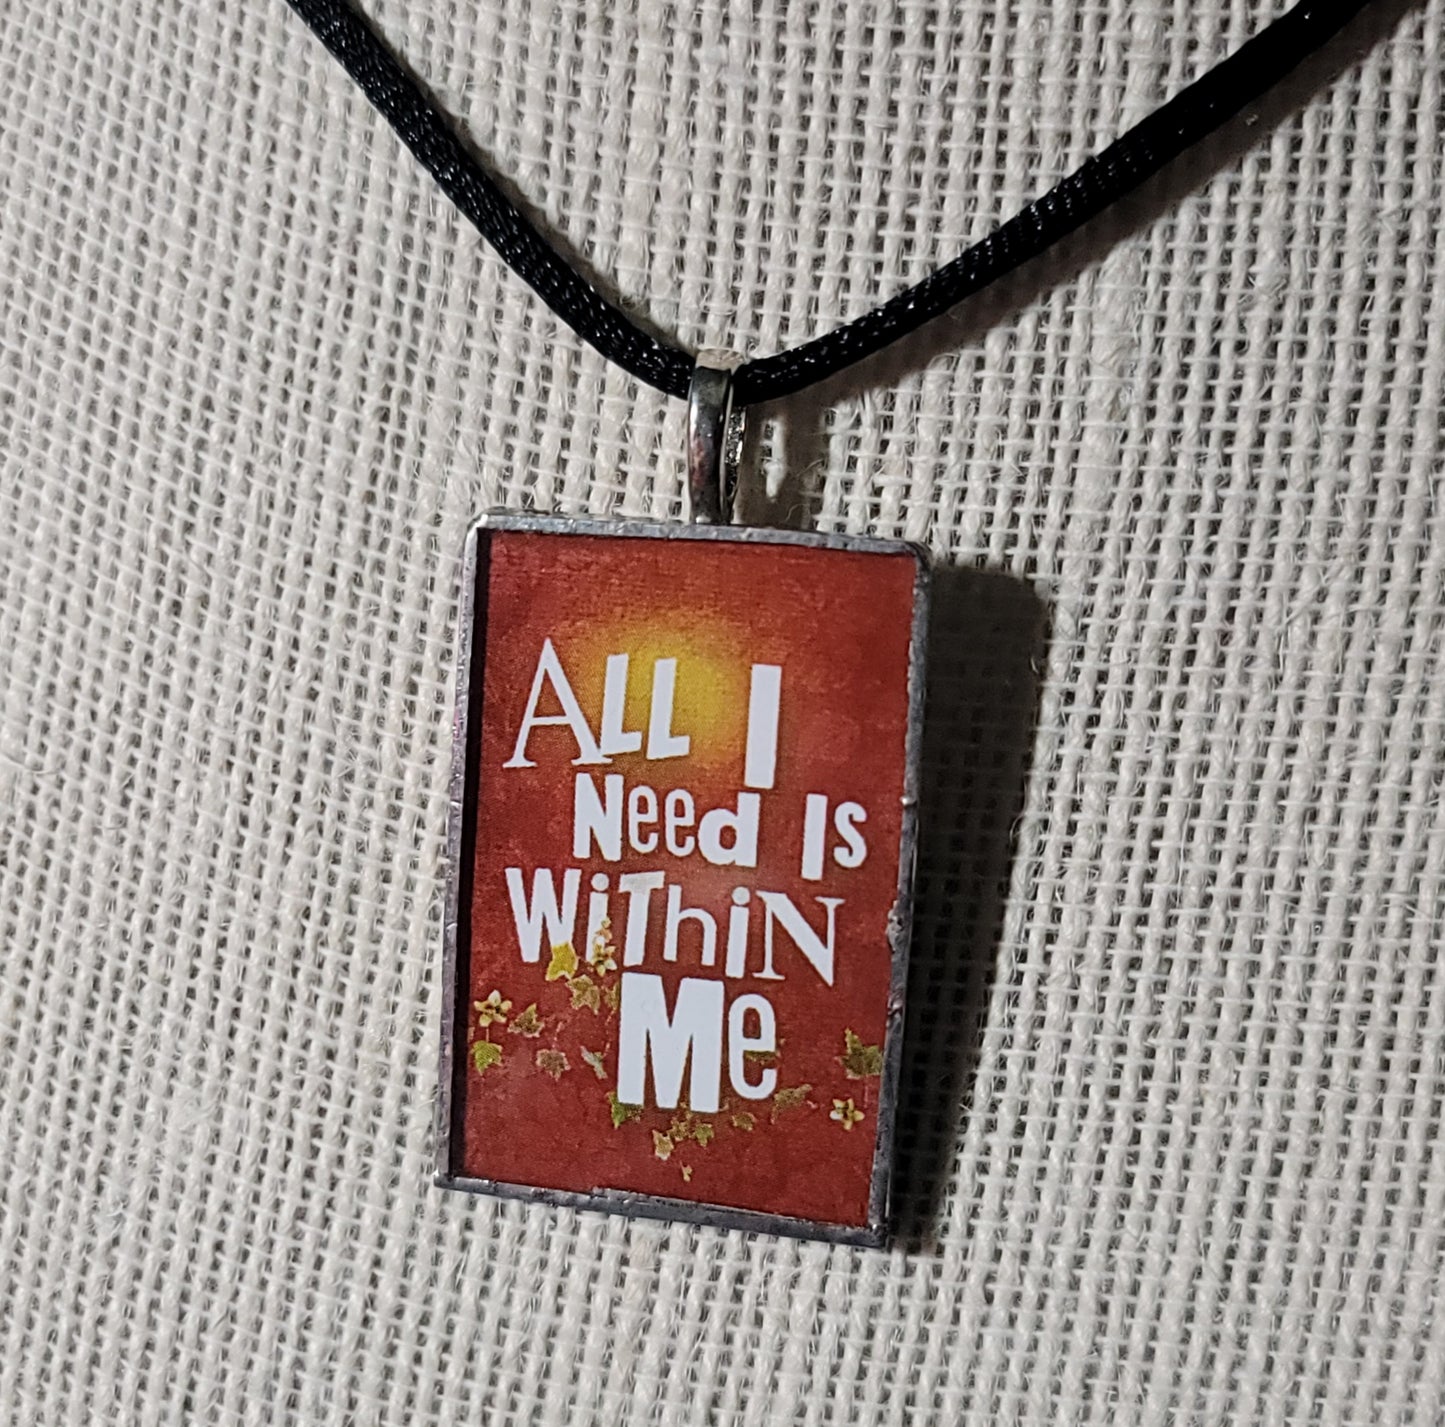 All I Need Is Within Me Handmade Stained-Glass Pendant